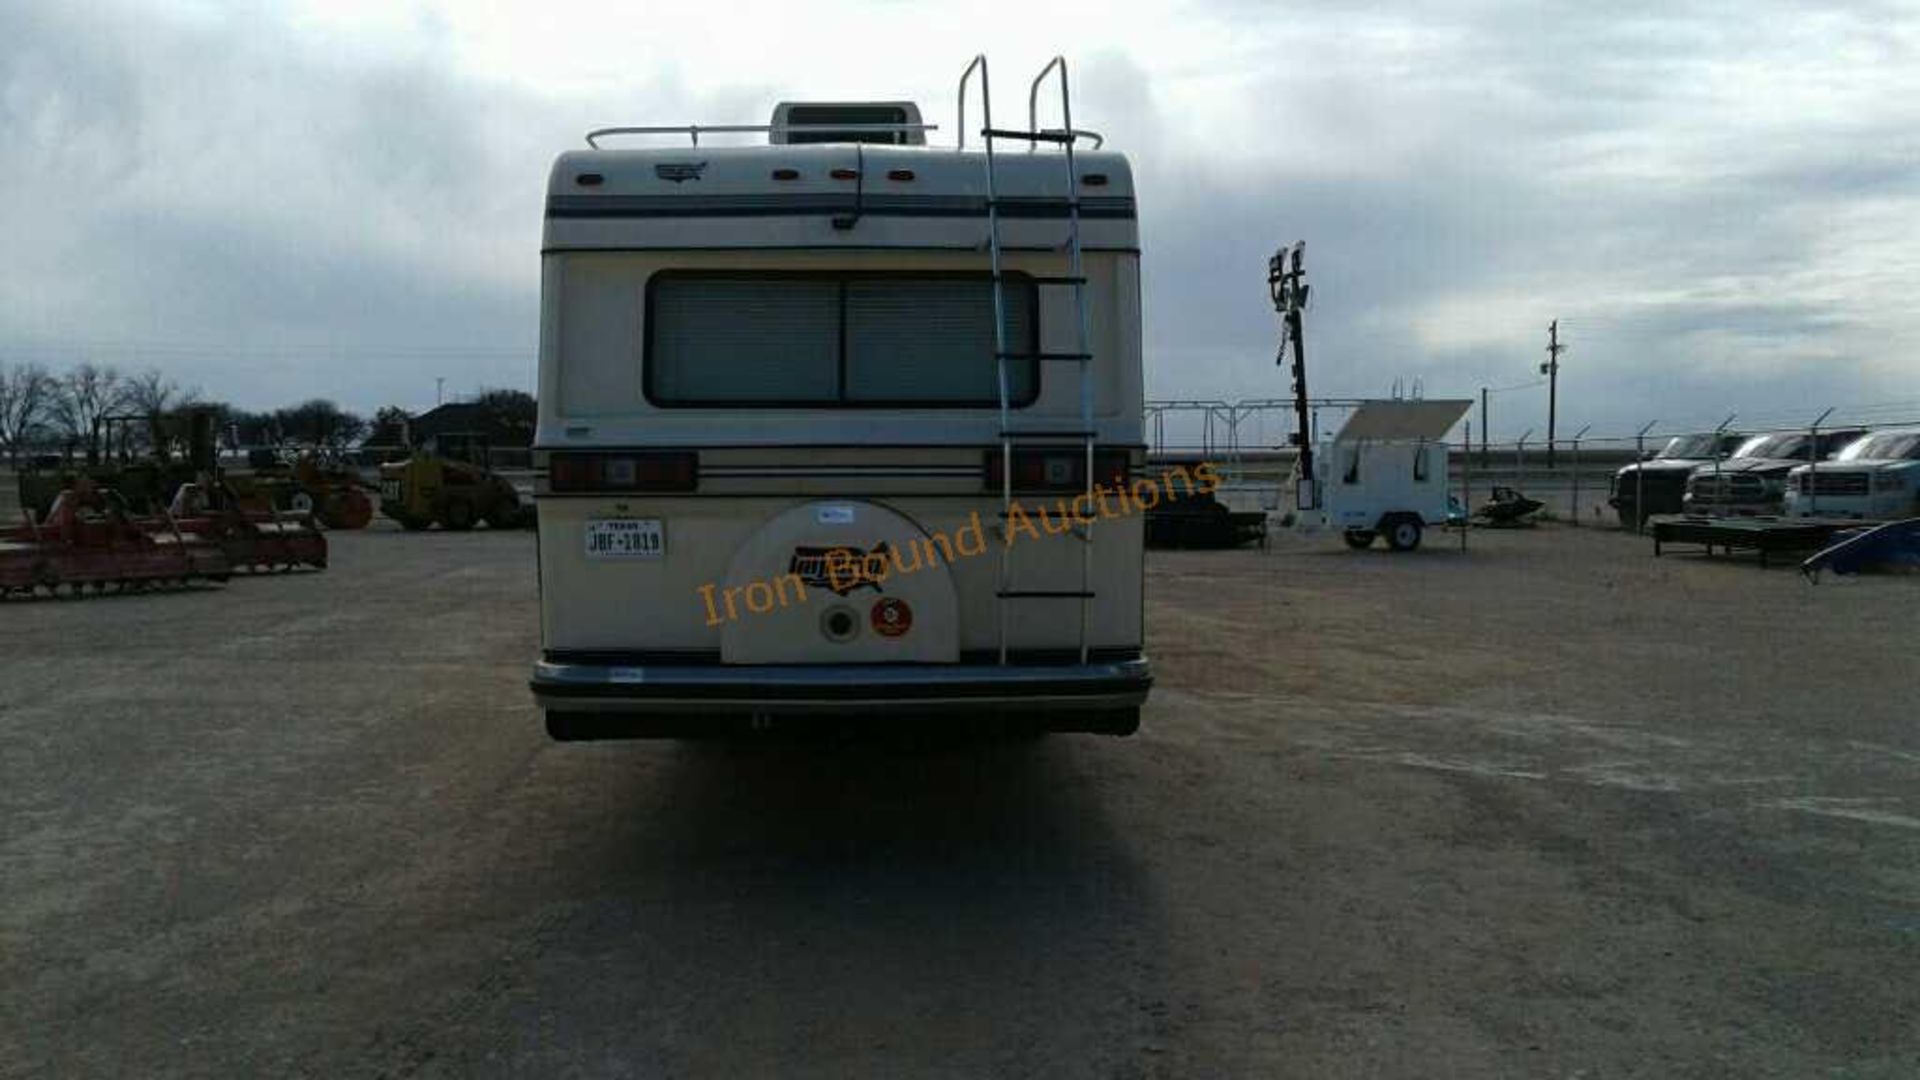 1989 Holiday Rambler Imperial Motorhome - Image 4 of 25